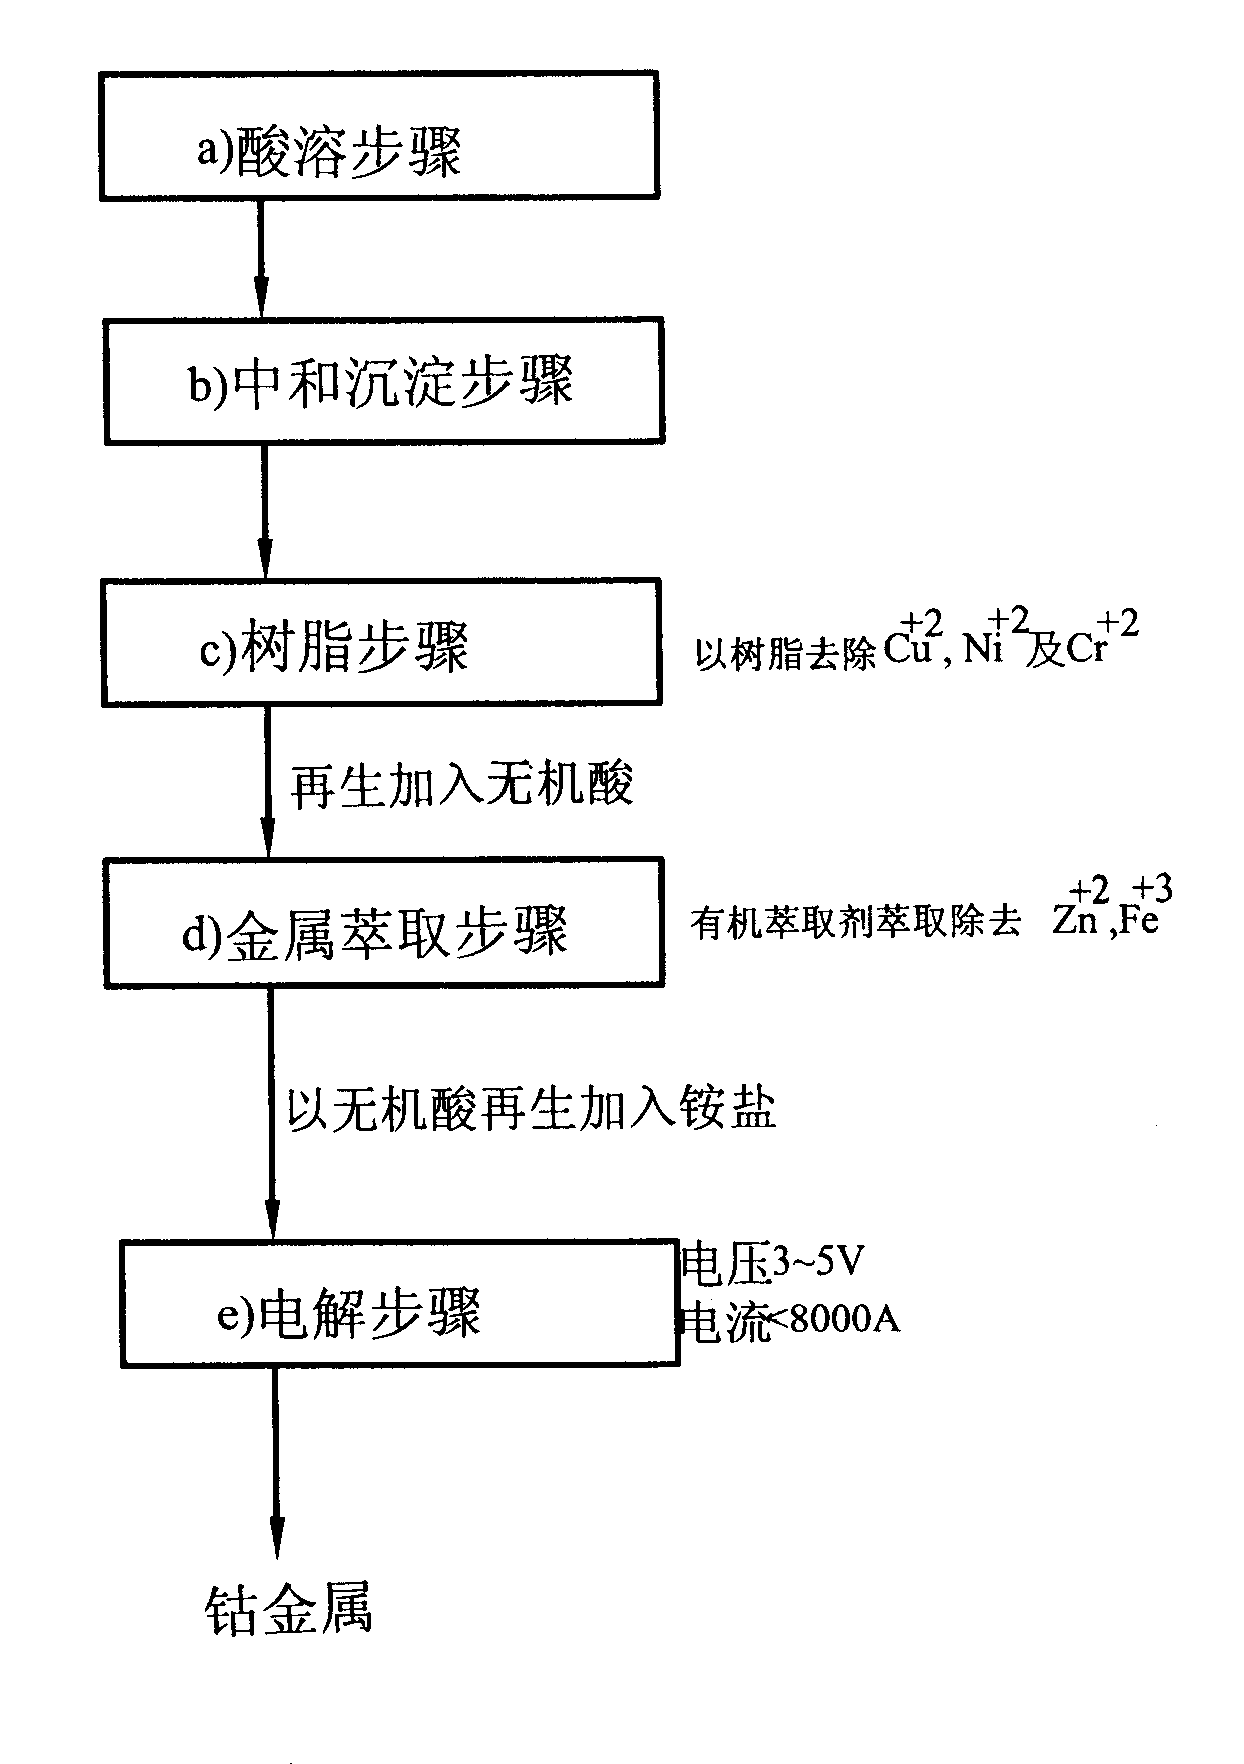 System and method for recycling mother solution of purify terephthalic acid and catalyst purifying regeneration